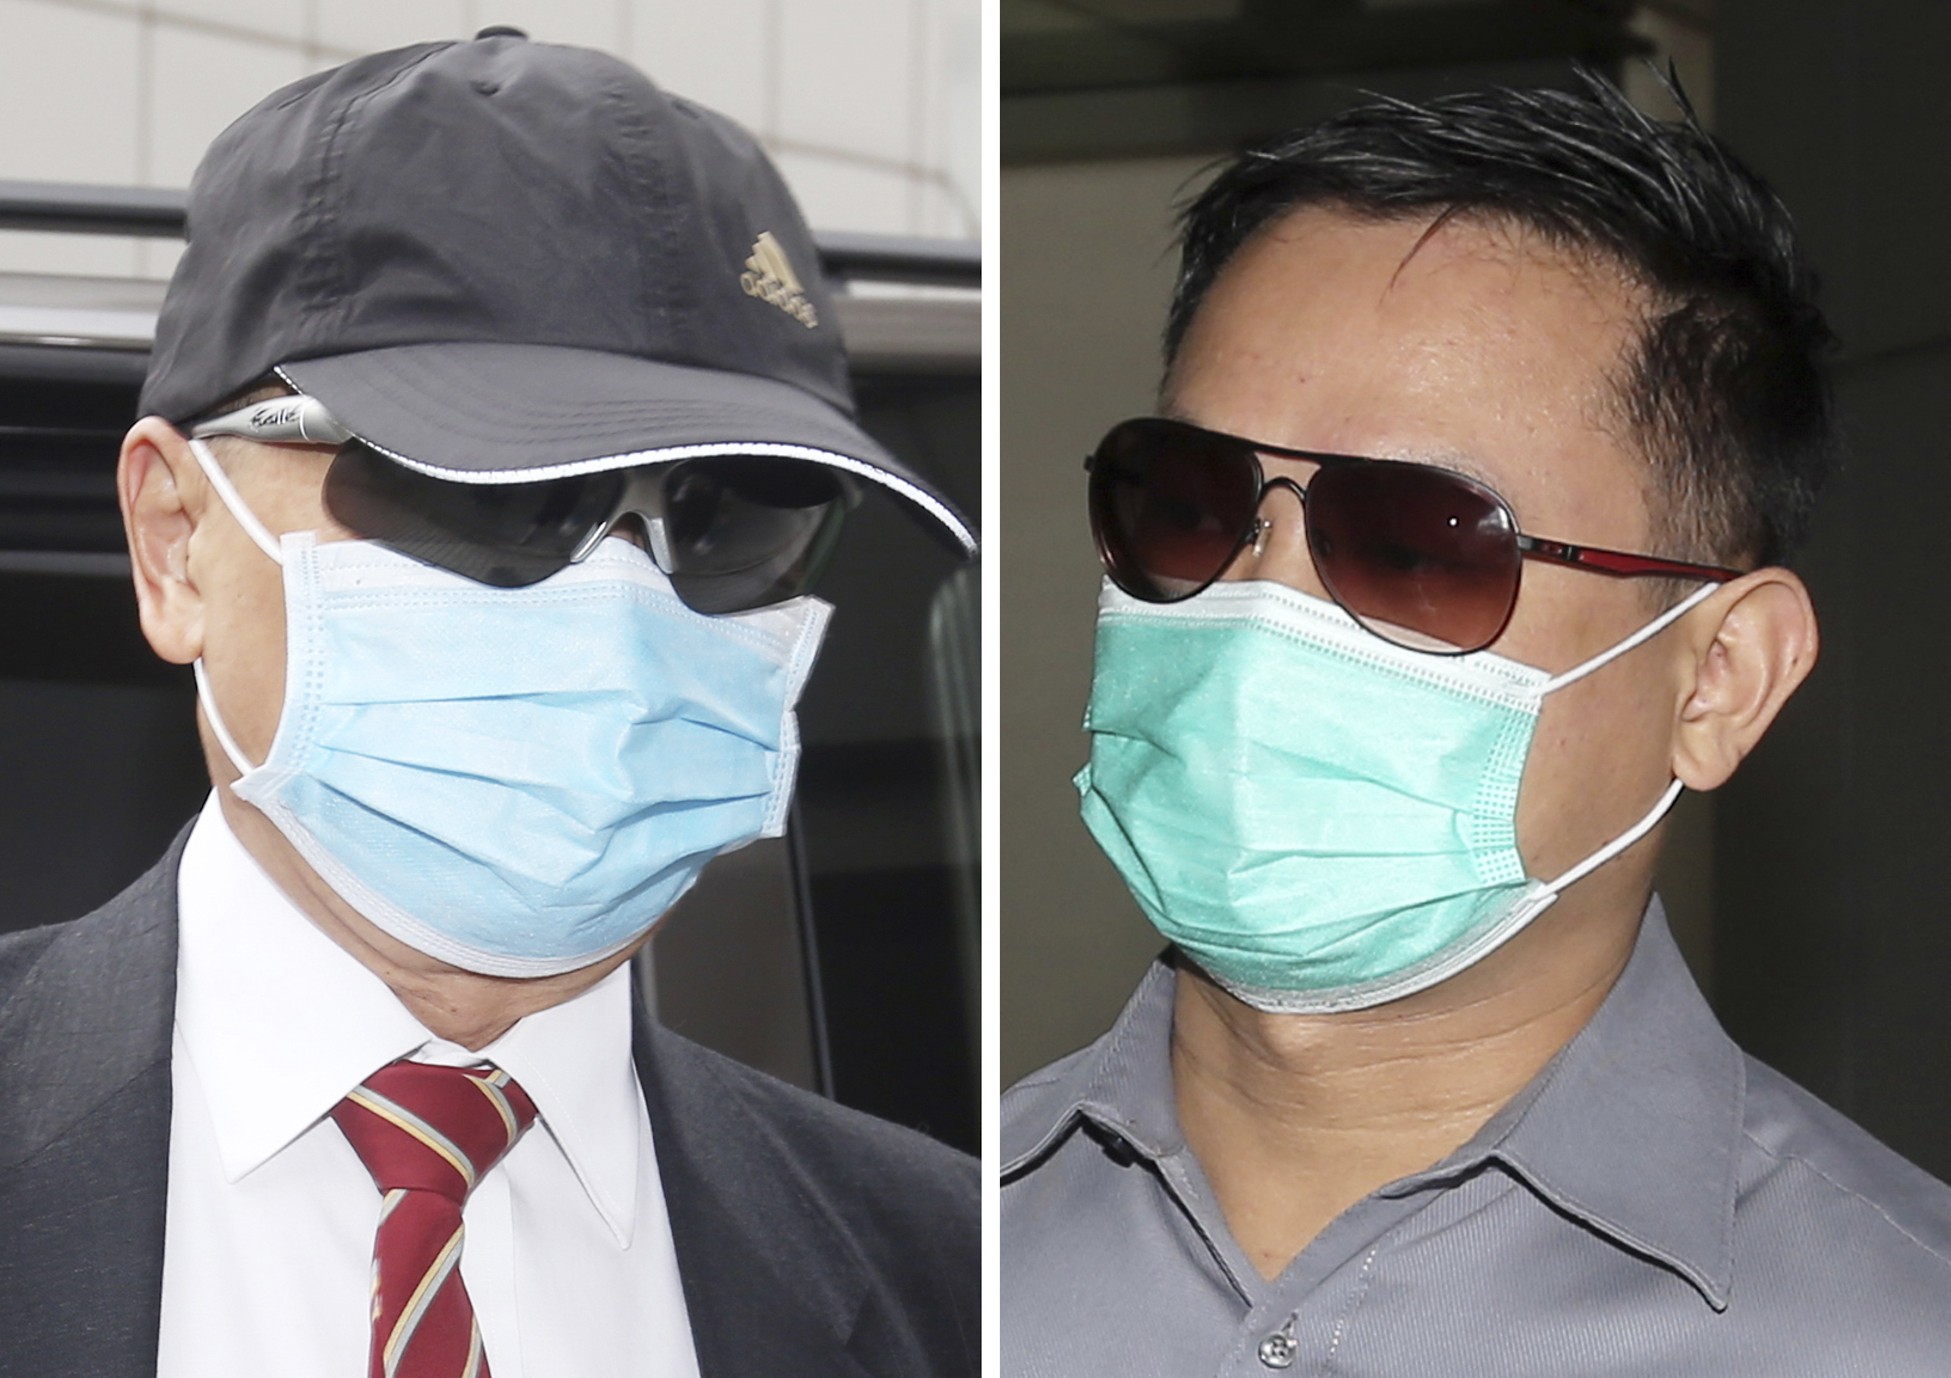 Dr Stephen Chow (left) and Chan Kwun-chung (right) were sentenced to 12 and 10 years respectively. Photo: K. Y. Cheng